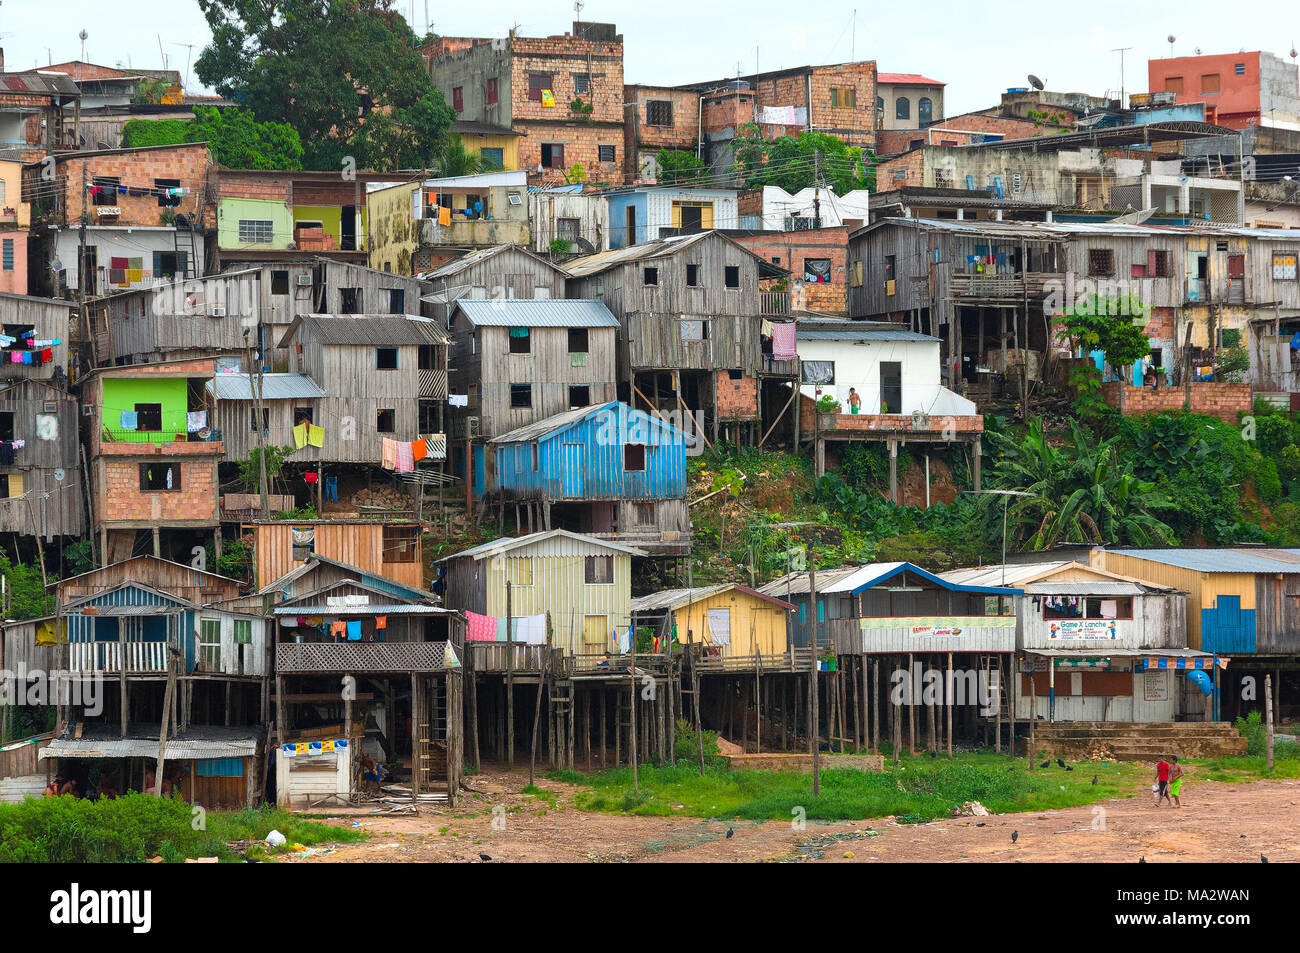 the city of Manaus seen from the Amazon River Stock Photo